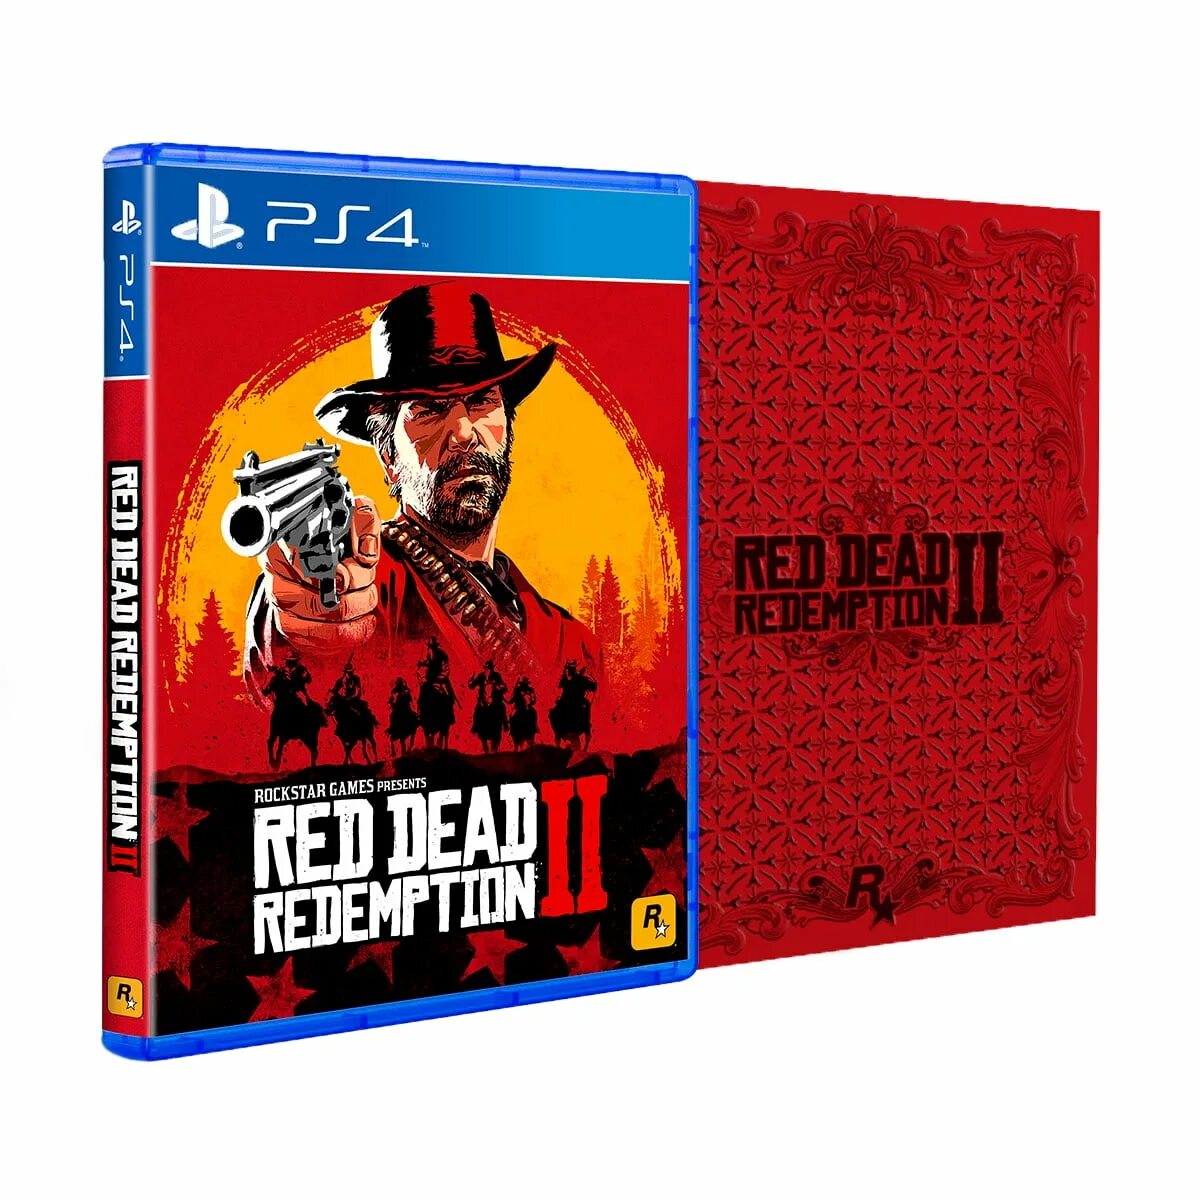 Red dead ps4 купить. Red Dead Redemption 2 стилбук. Red Dead Redemption 2 ps4 Steelbook. Red Dead Redemption 2 стилбук ps4. Red Dead Redemption 2: Ultimate Edition.